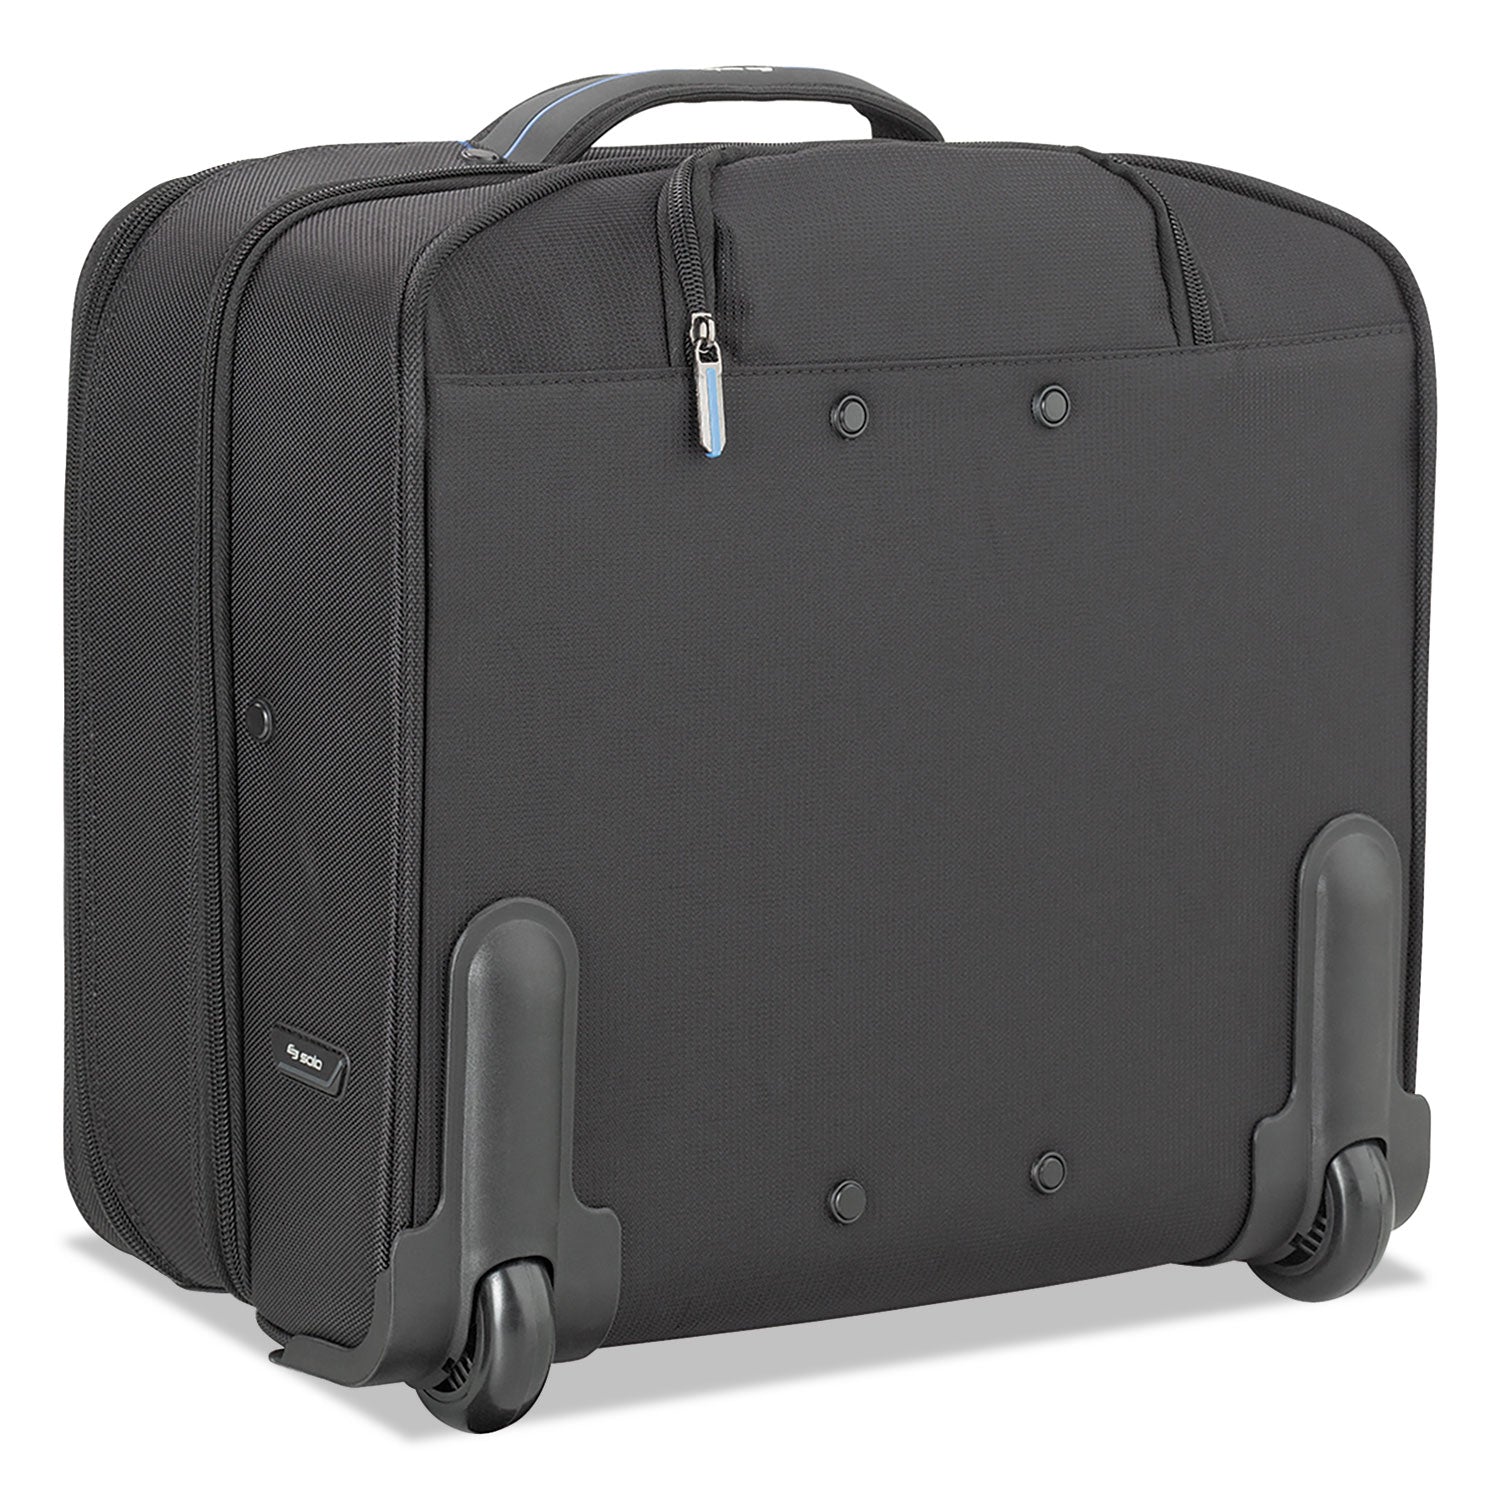 Active Rolling Overnighter Case, Fits Devices Up to 16", Polyester, 7.75 x 14.5 x 14.5, Black - 